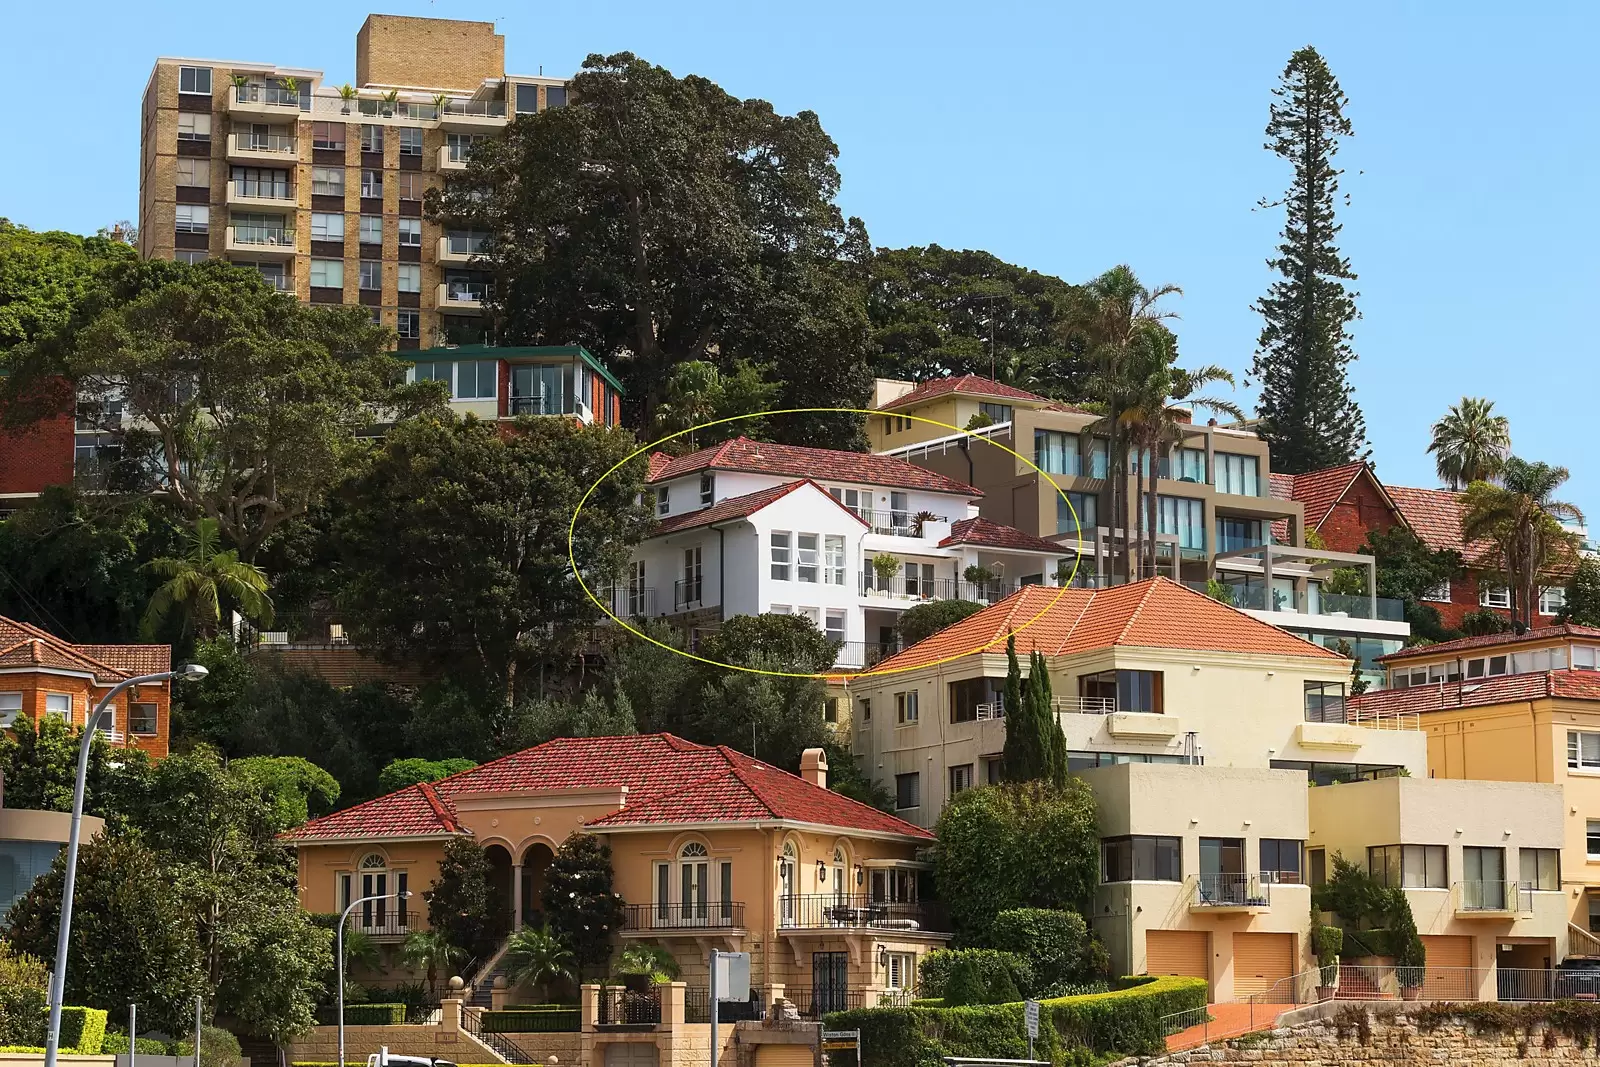 Photo #3: Darling Point - Sold by Sydney Sotheby's International Realty